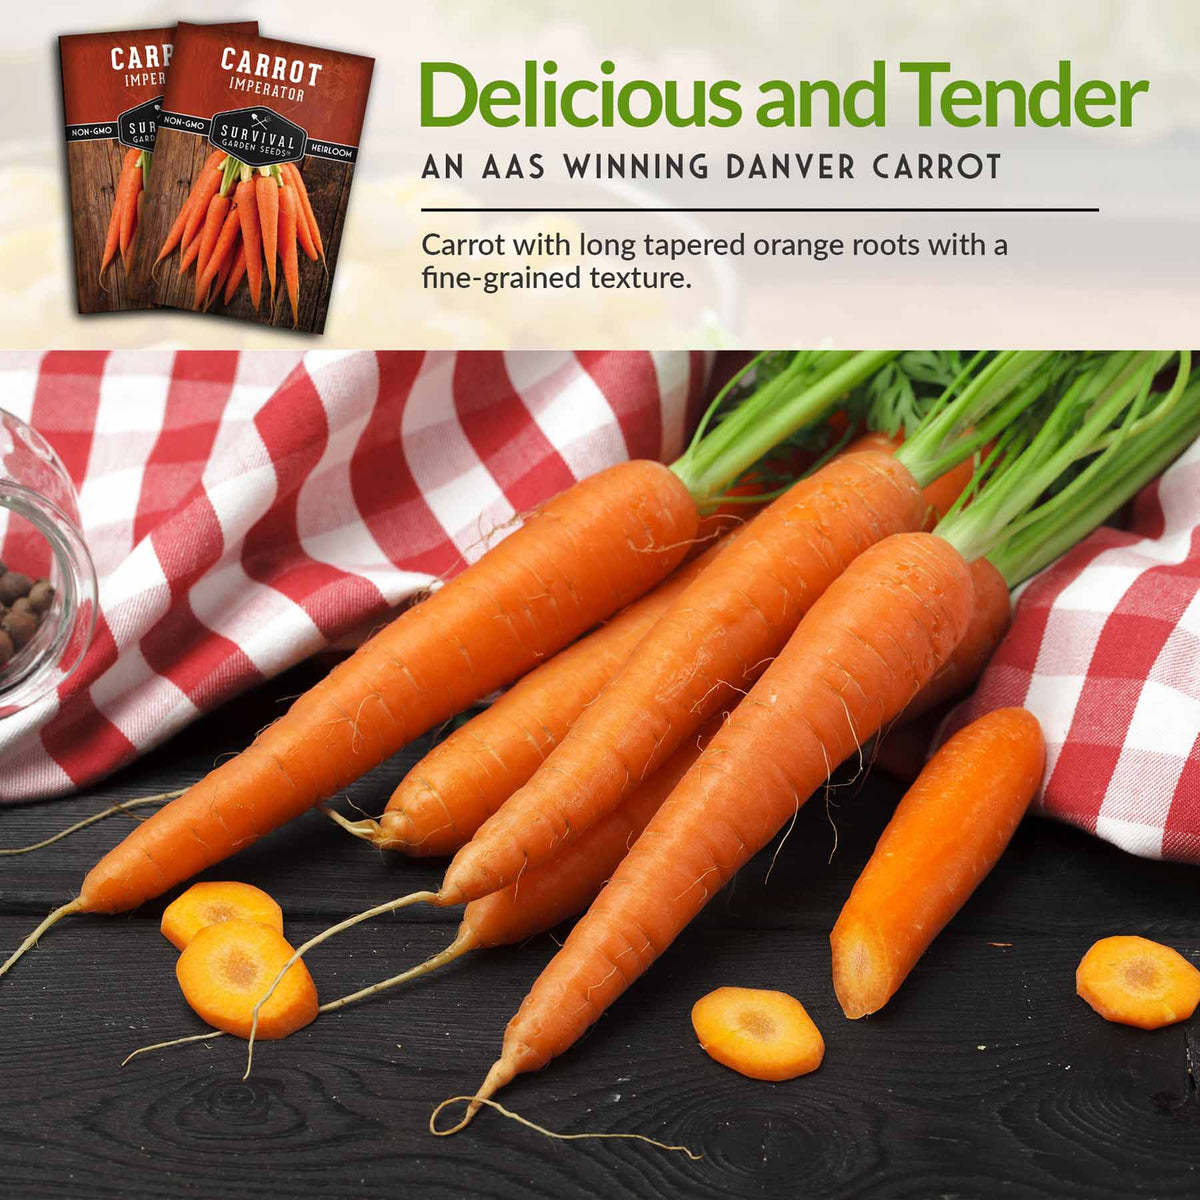 Imperator Carrots are an AAS award winning heirloom carrot